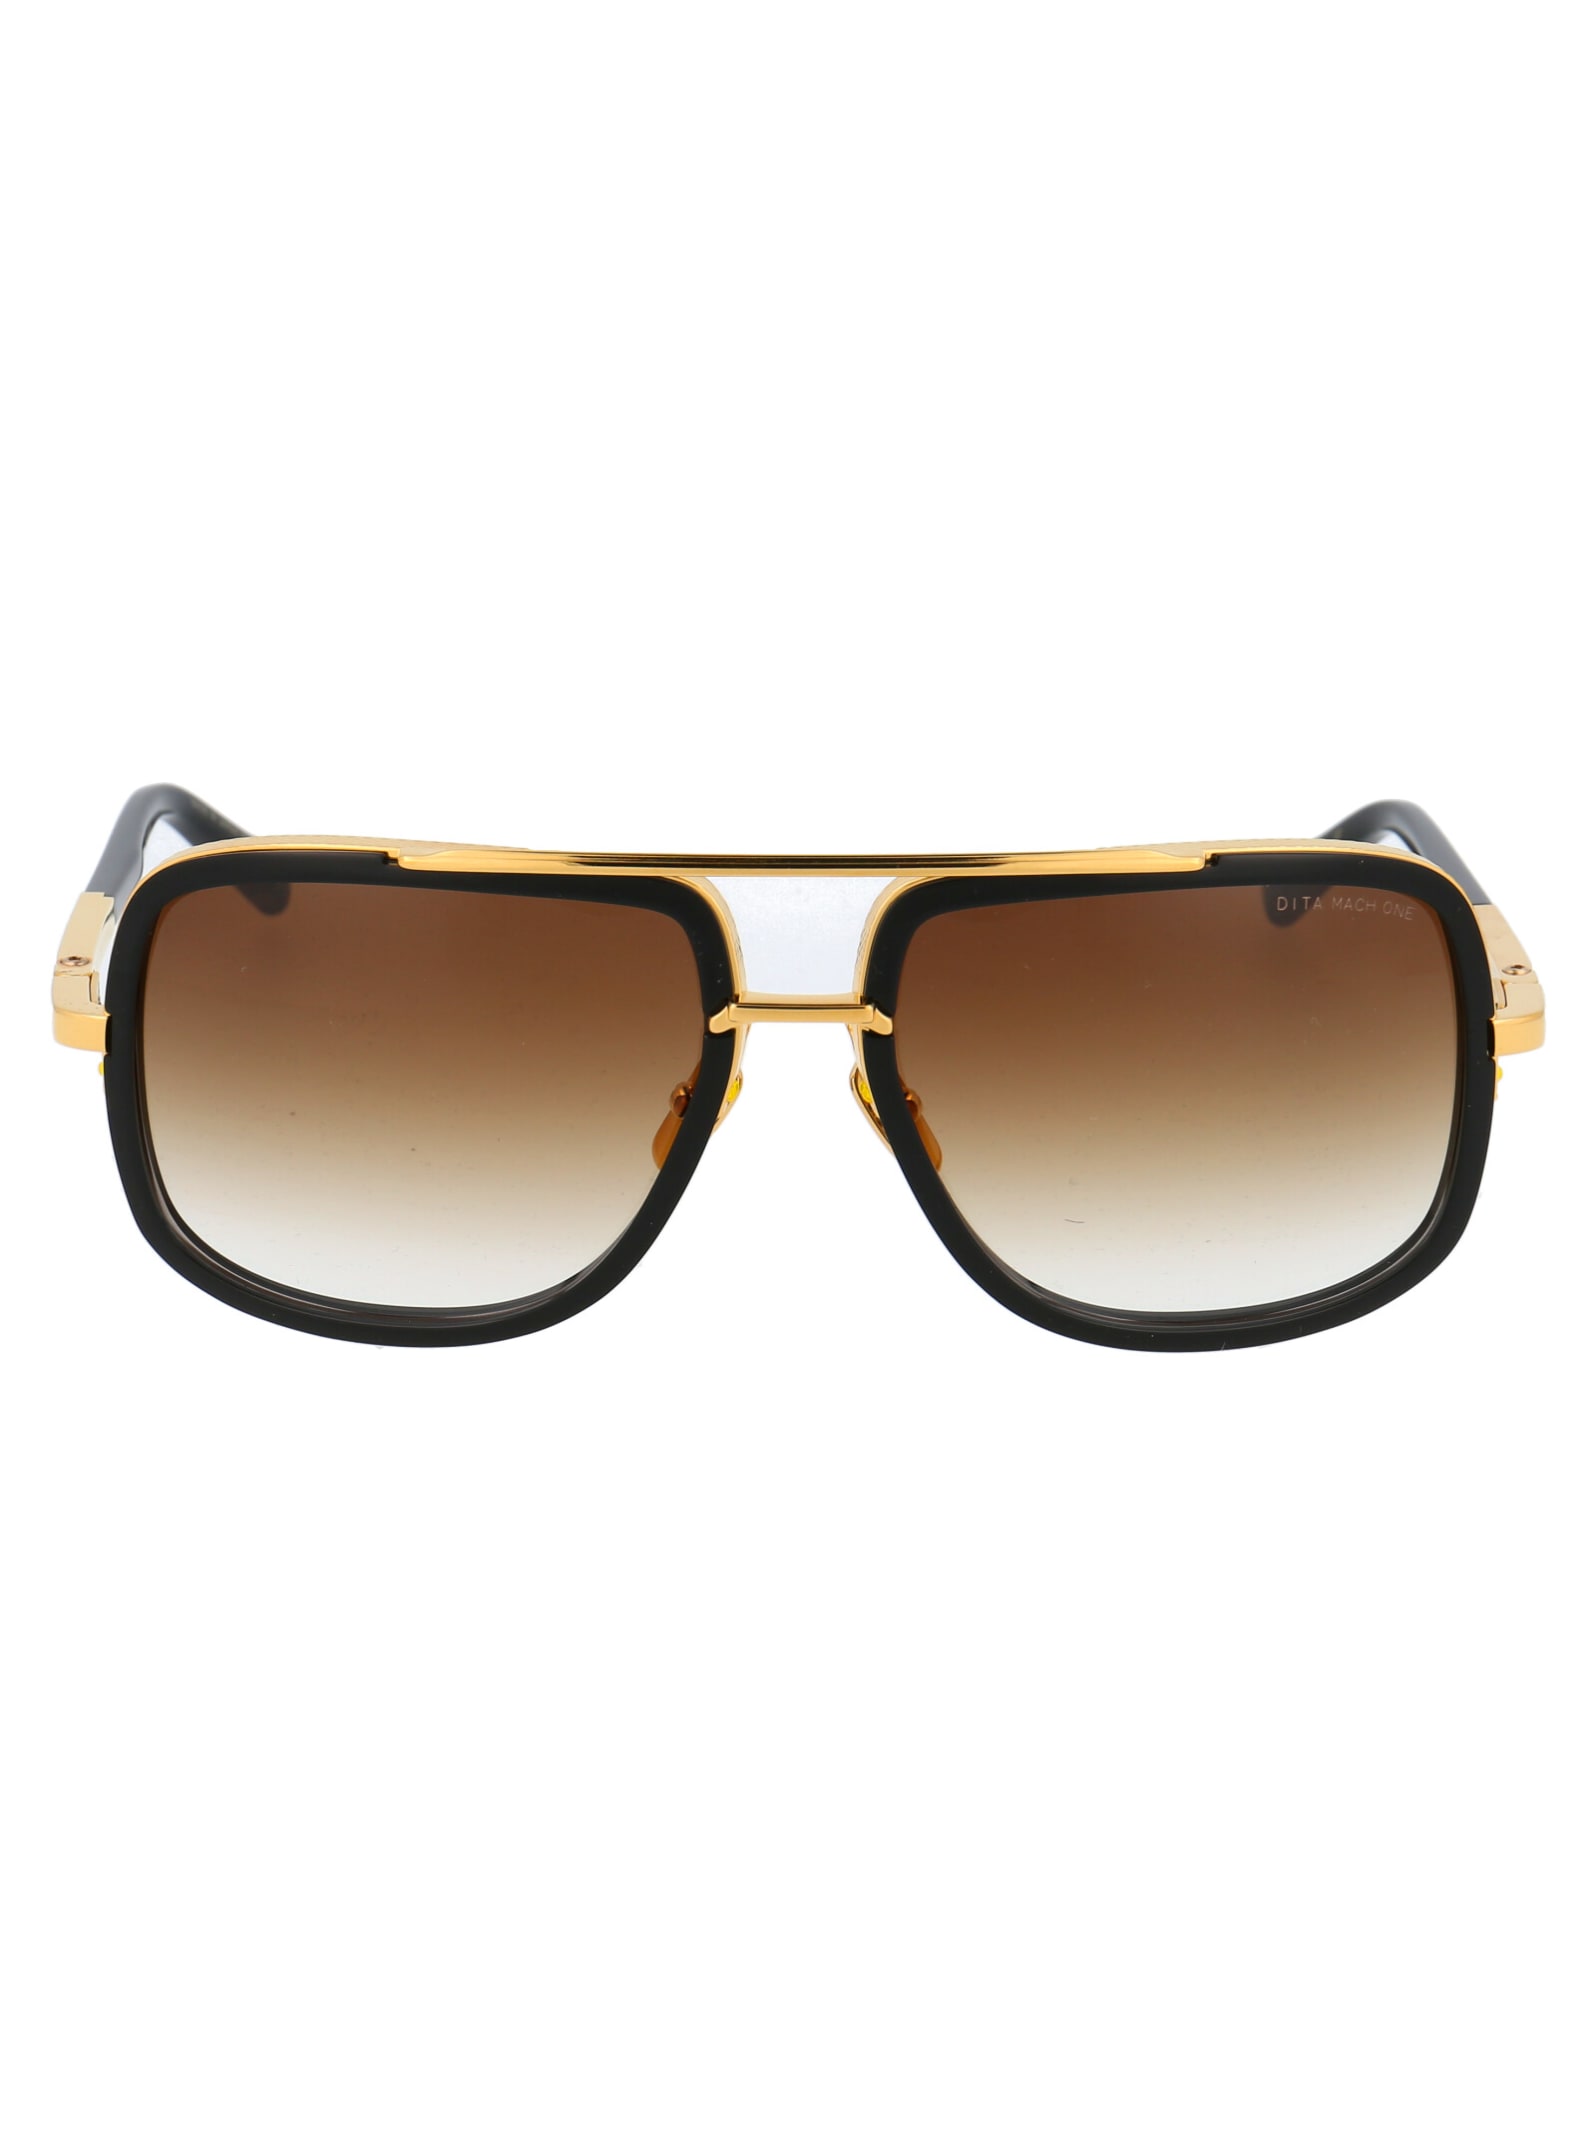 Dita Mach-one Sunglasses In Shiny 18k Gold - Black W/d.brown To Clear-ar